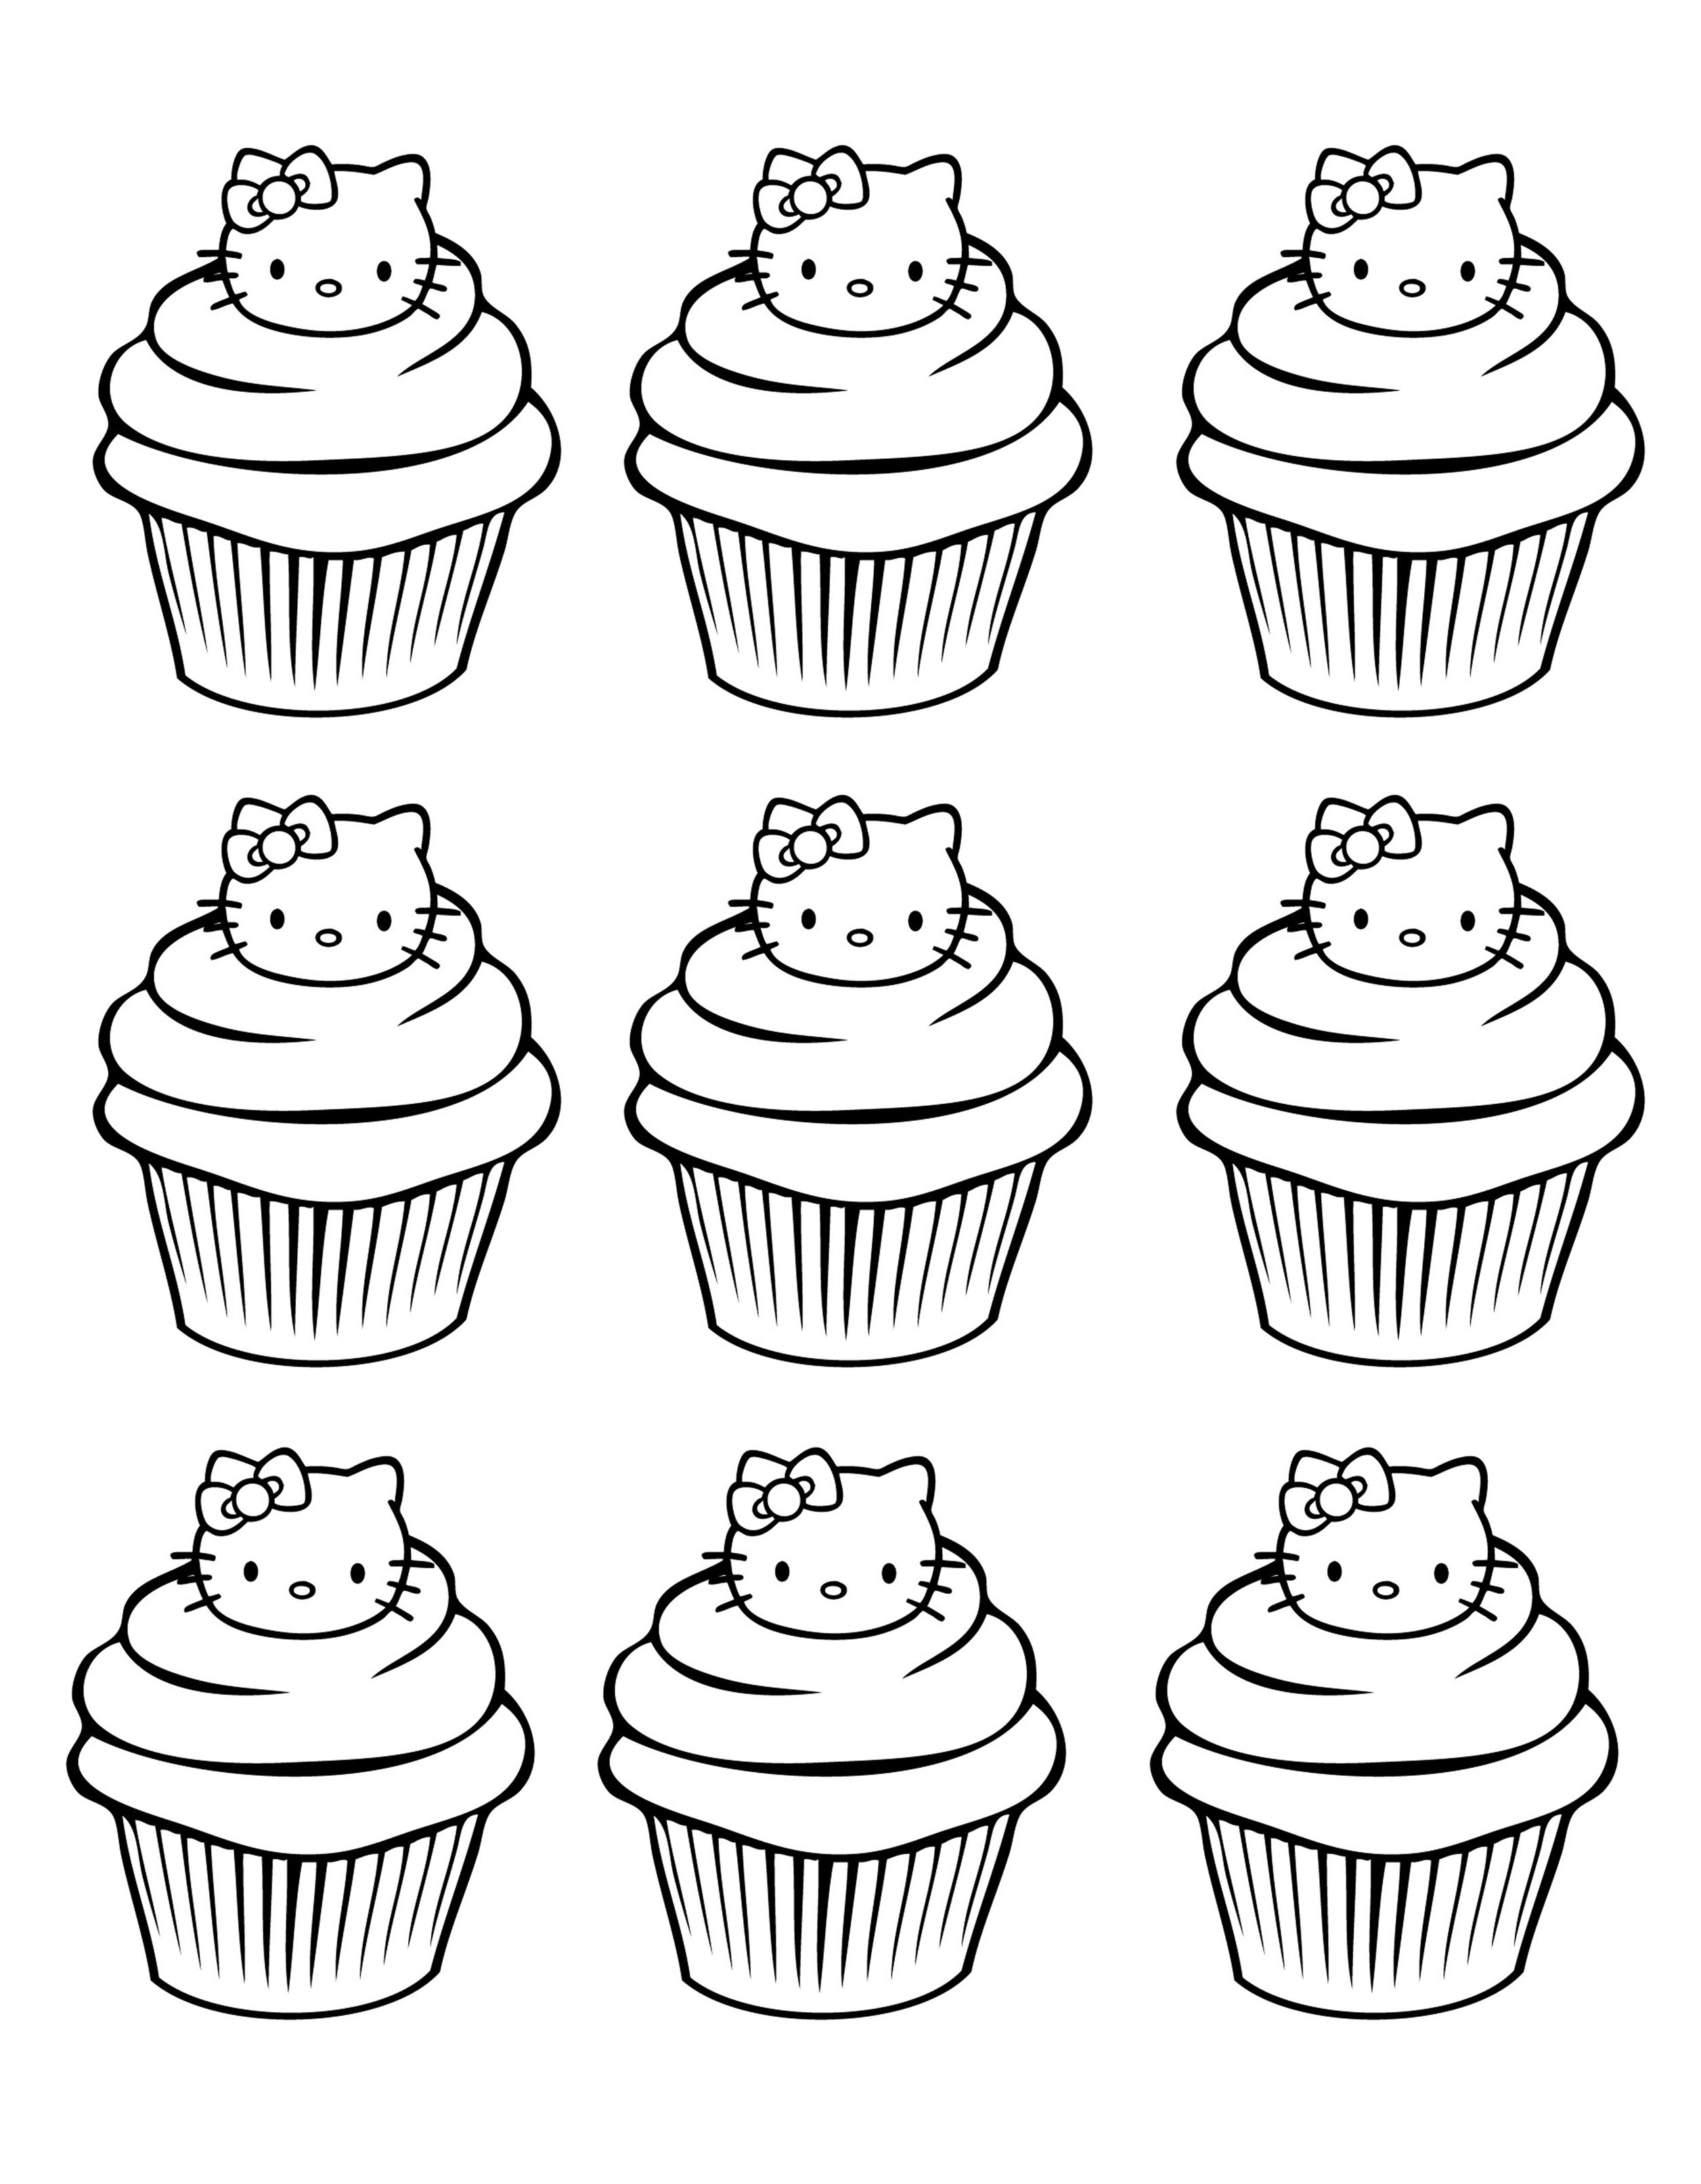 Coloring page of sweet Hello Kitty cupcakes